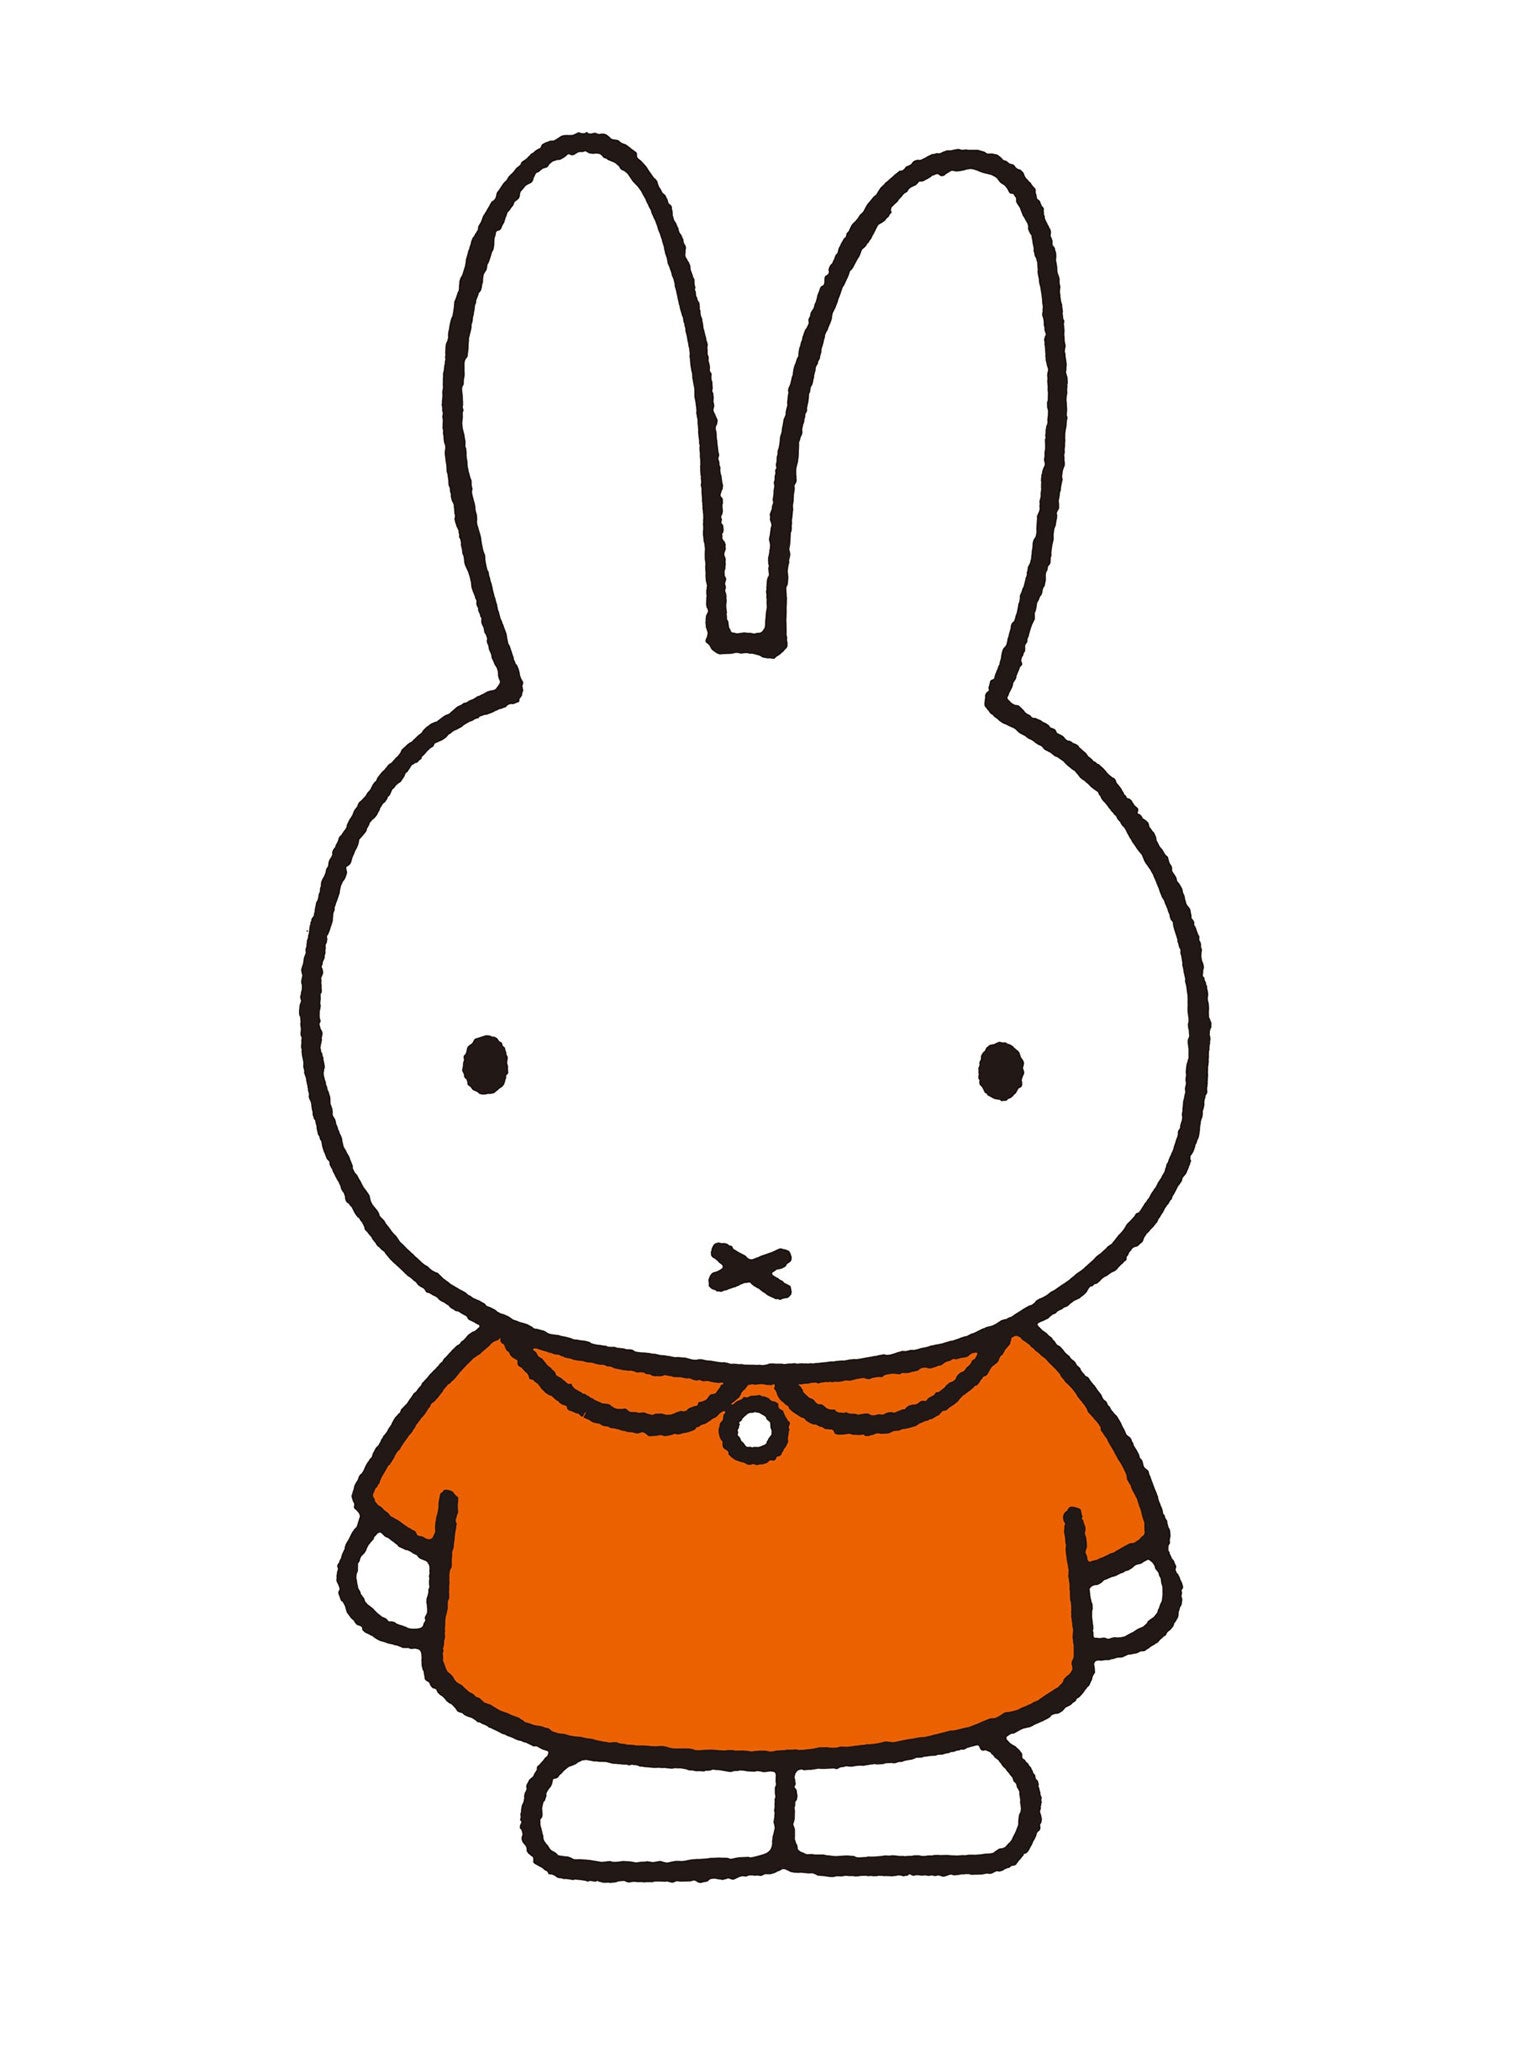 Thoroughly Modern Miffy: Dick Bruna's cartoon rabbit gets revamp after 58  years | The Independent | The Independent